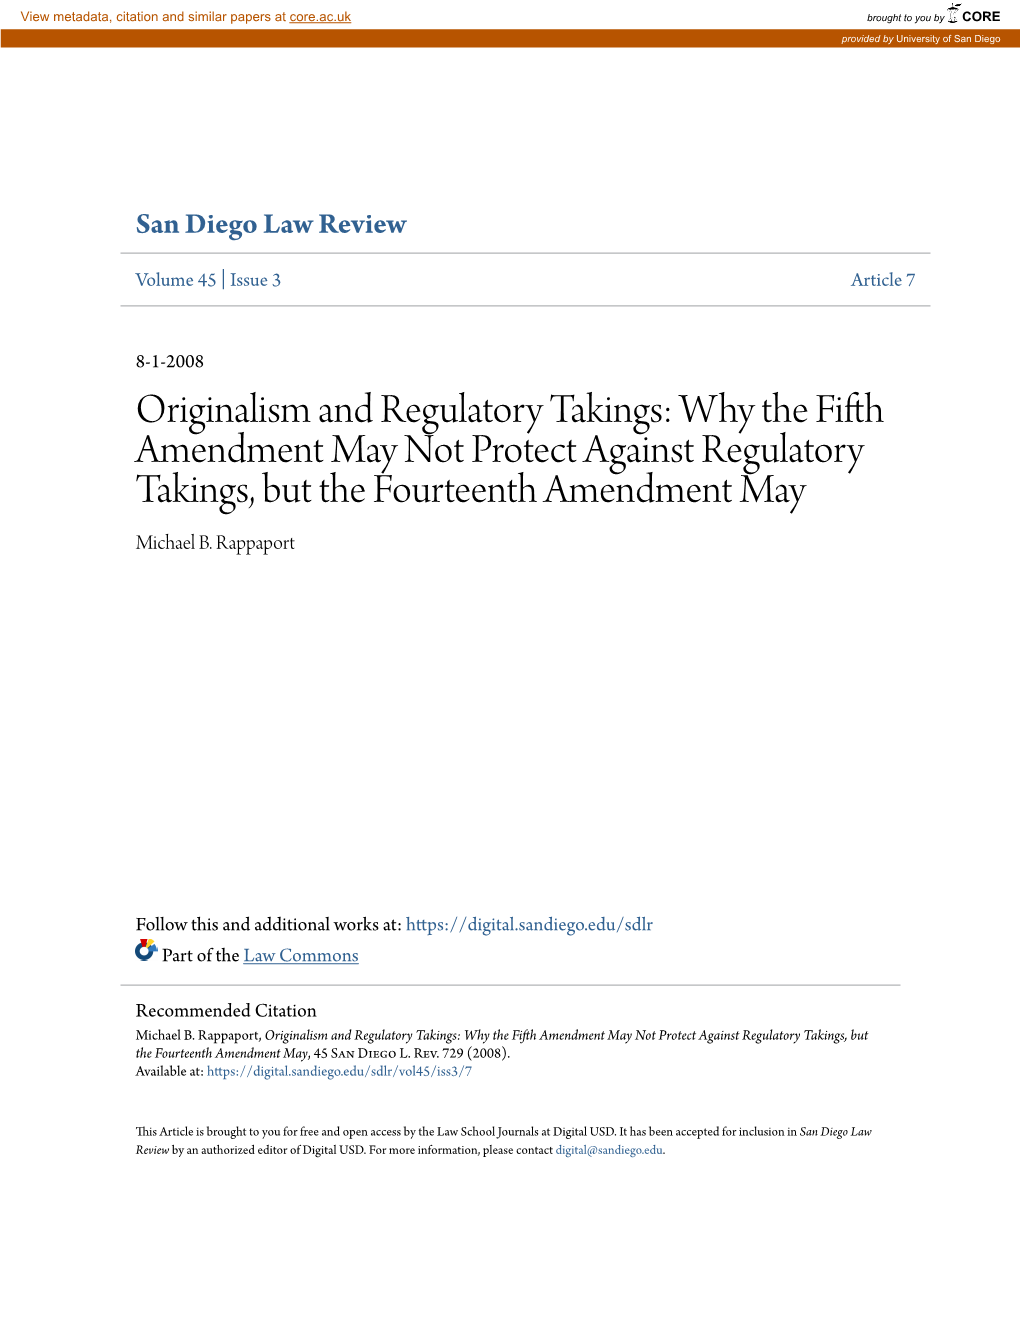 Originalism and Regulatory Takings: Why the Fifth Amendment May Not Protect Against Regulatory Takings, but the Fourteenth Amendment May Michael B